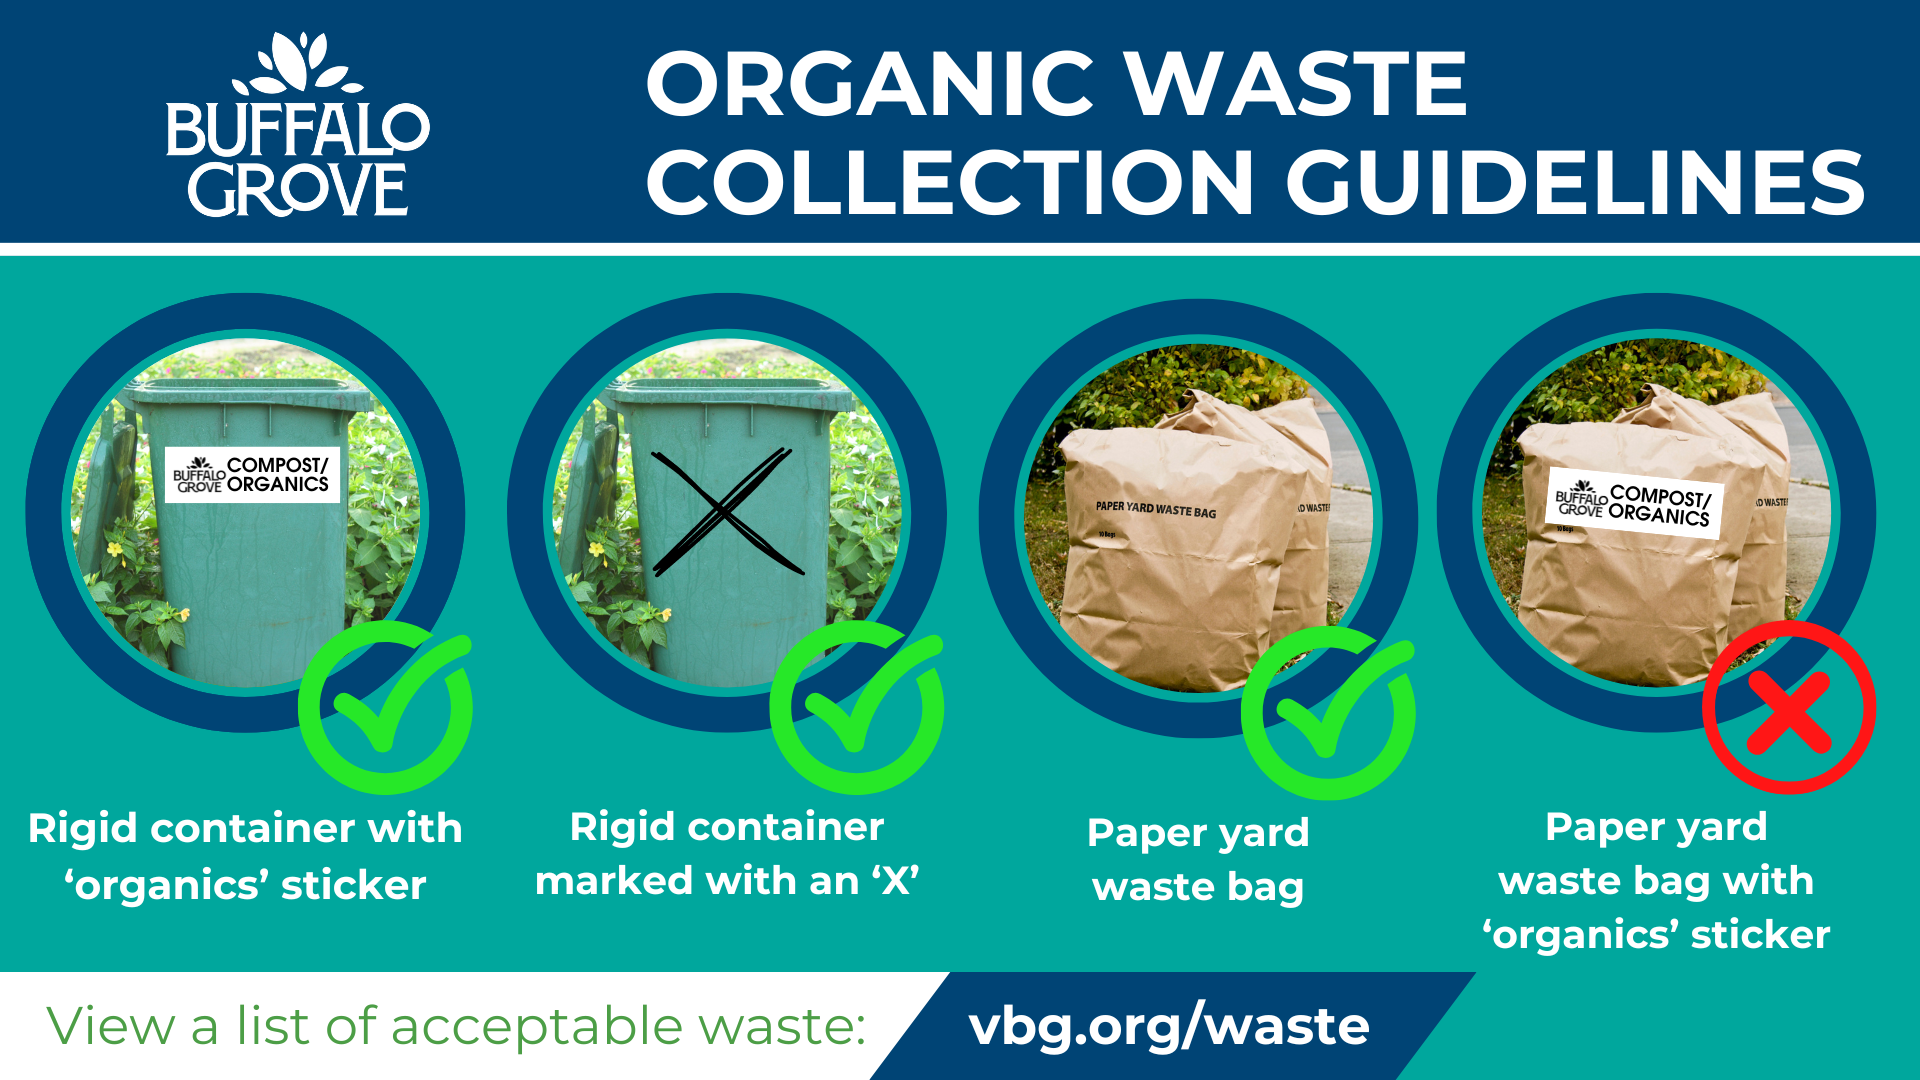 Organic waste collection guidelines